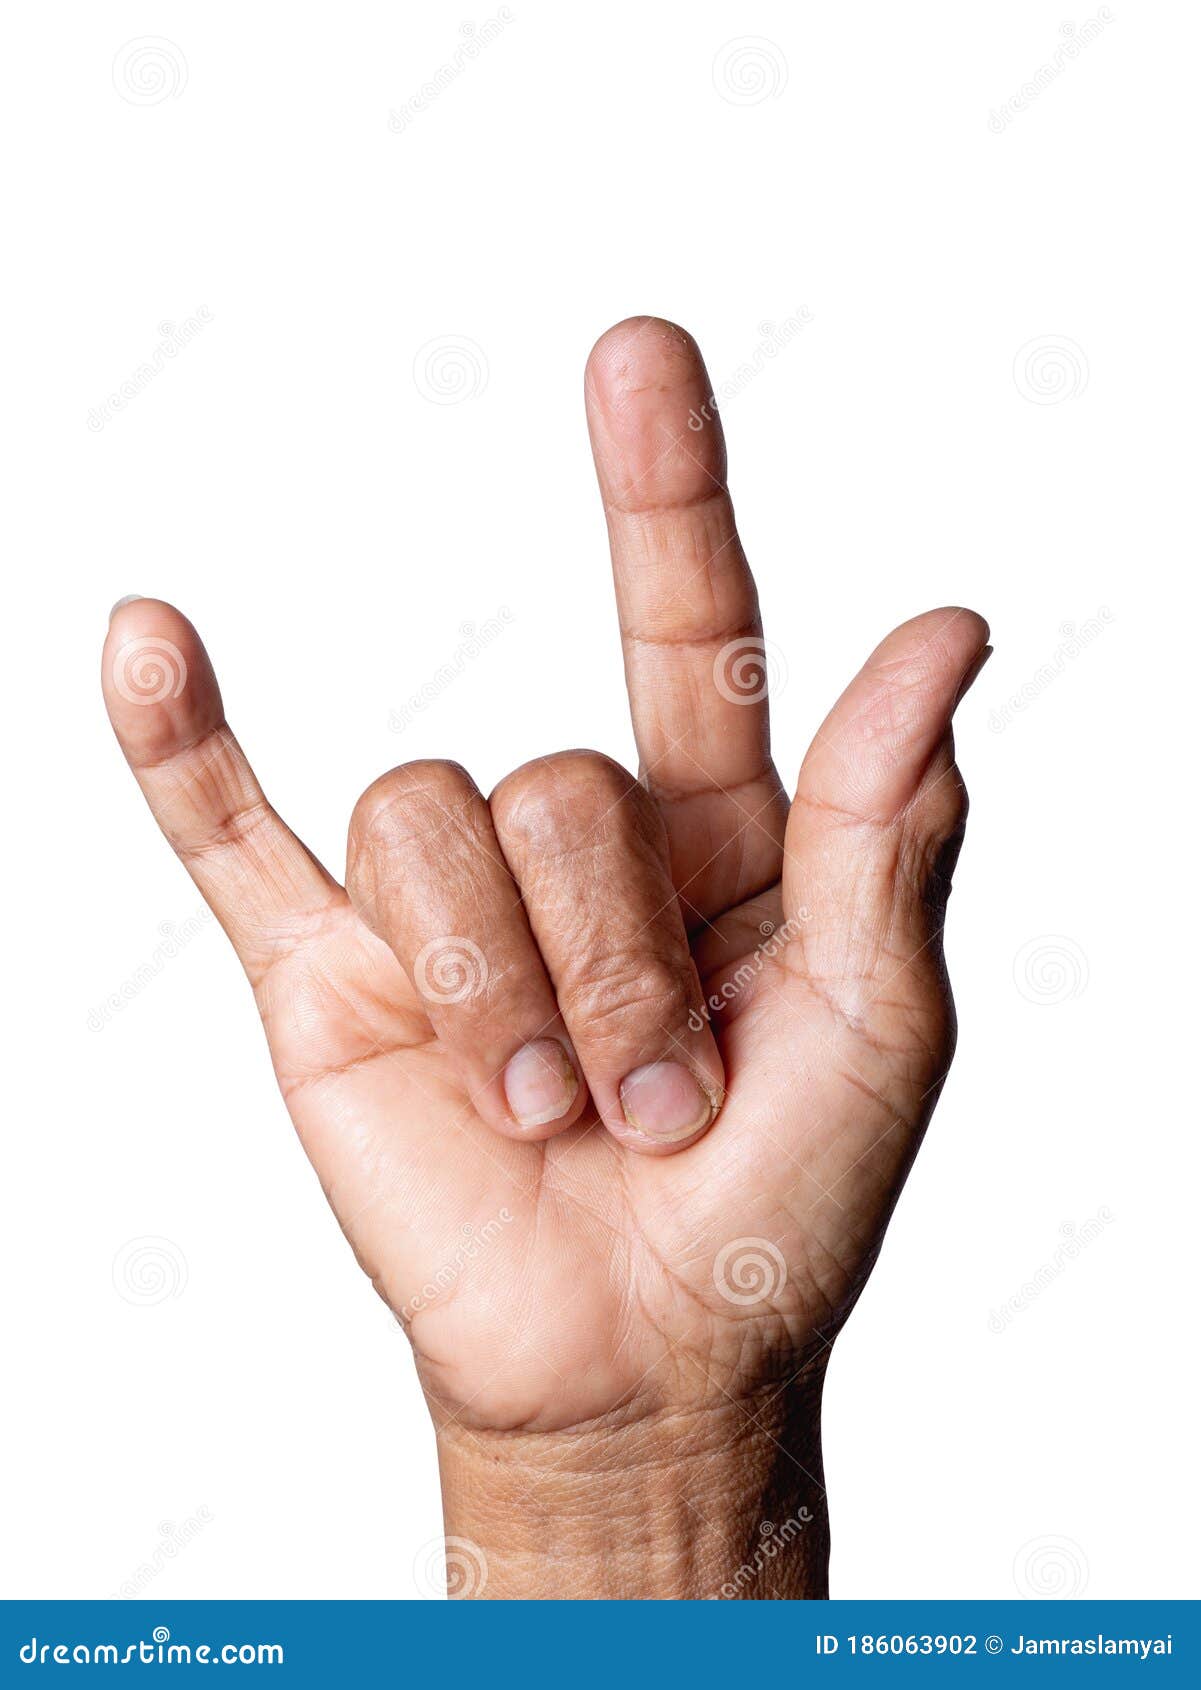 239 Hand Sign Language I Love You Photos Free Royalty Free Stock Photos From Dreamstime